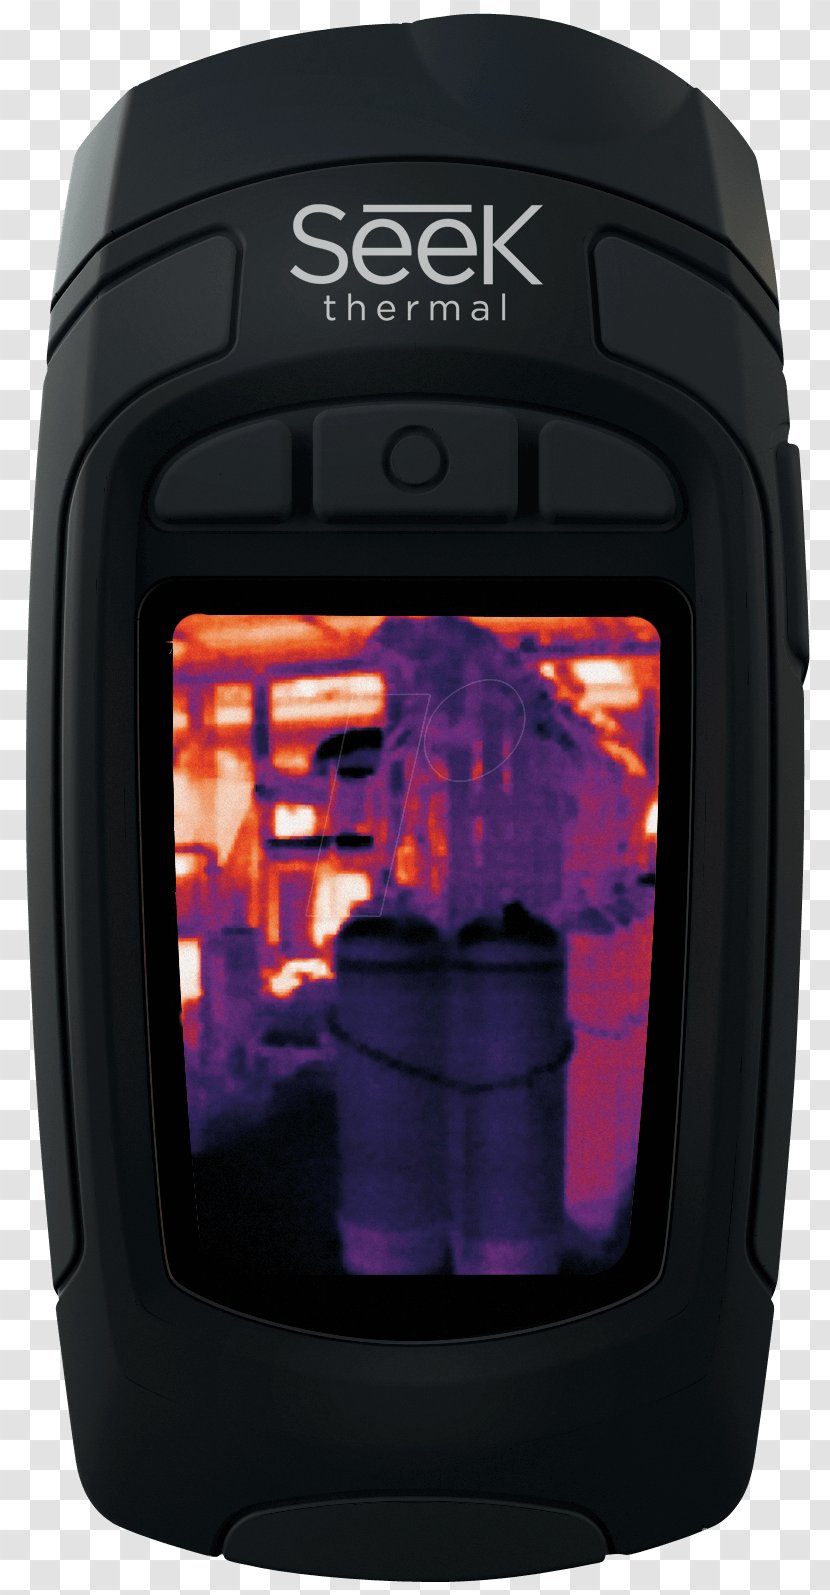 Thermographic Camera Seek Thermal Forward-looking Infrared Imaging - Forwardlooking Transparent PNG